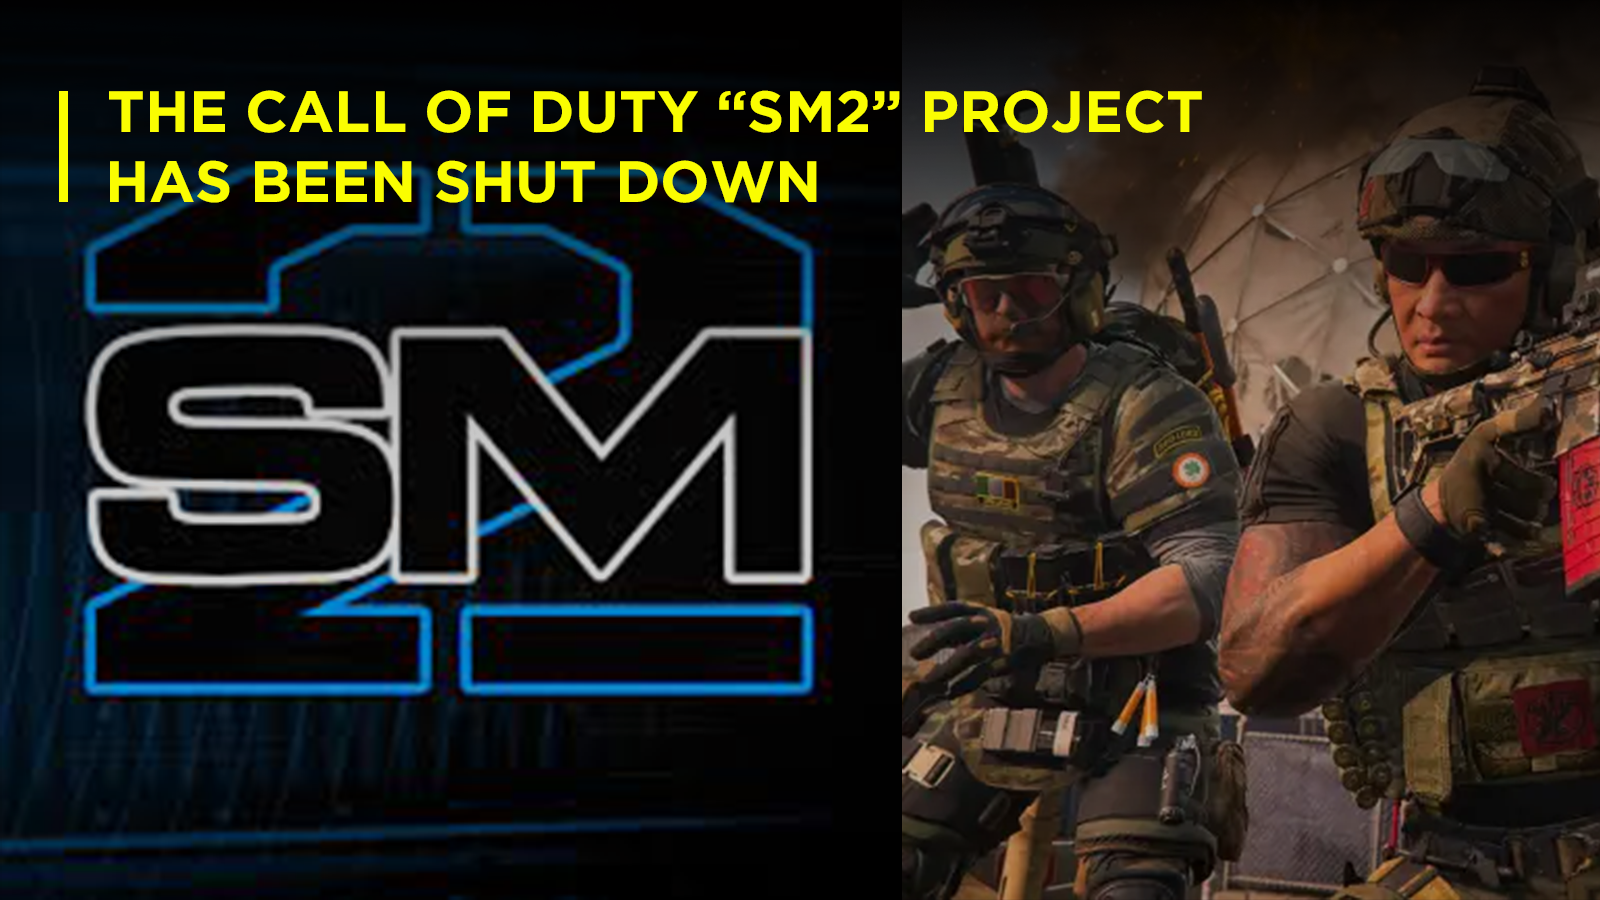 The CALL OF DUTY SM2 Project Has Been Shut Down